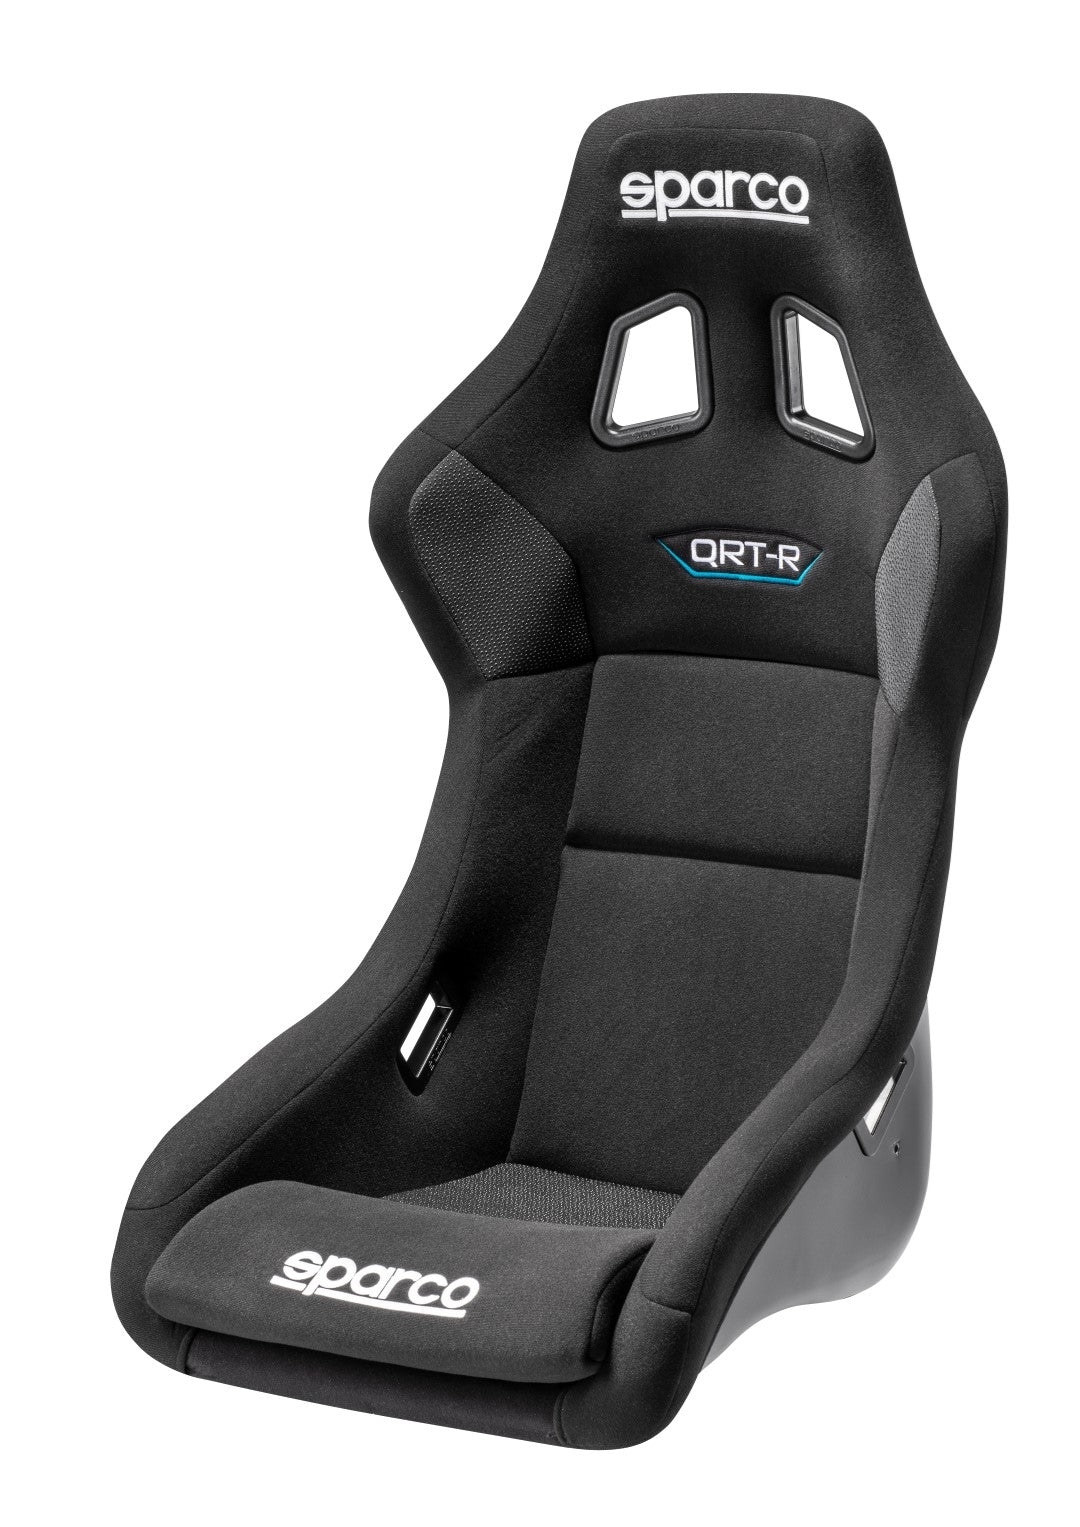 Sparco - QRT-R Racing Seat (2019)